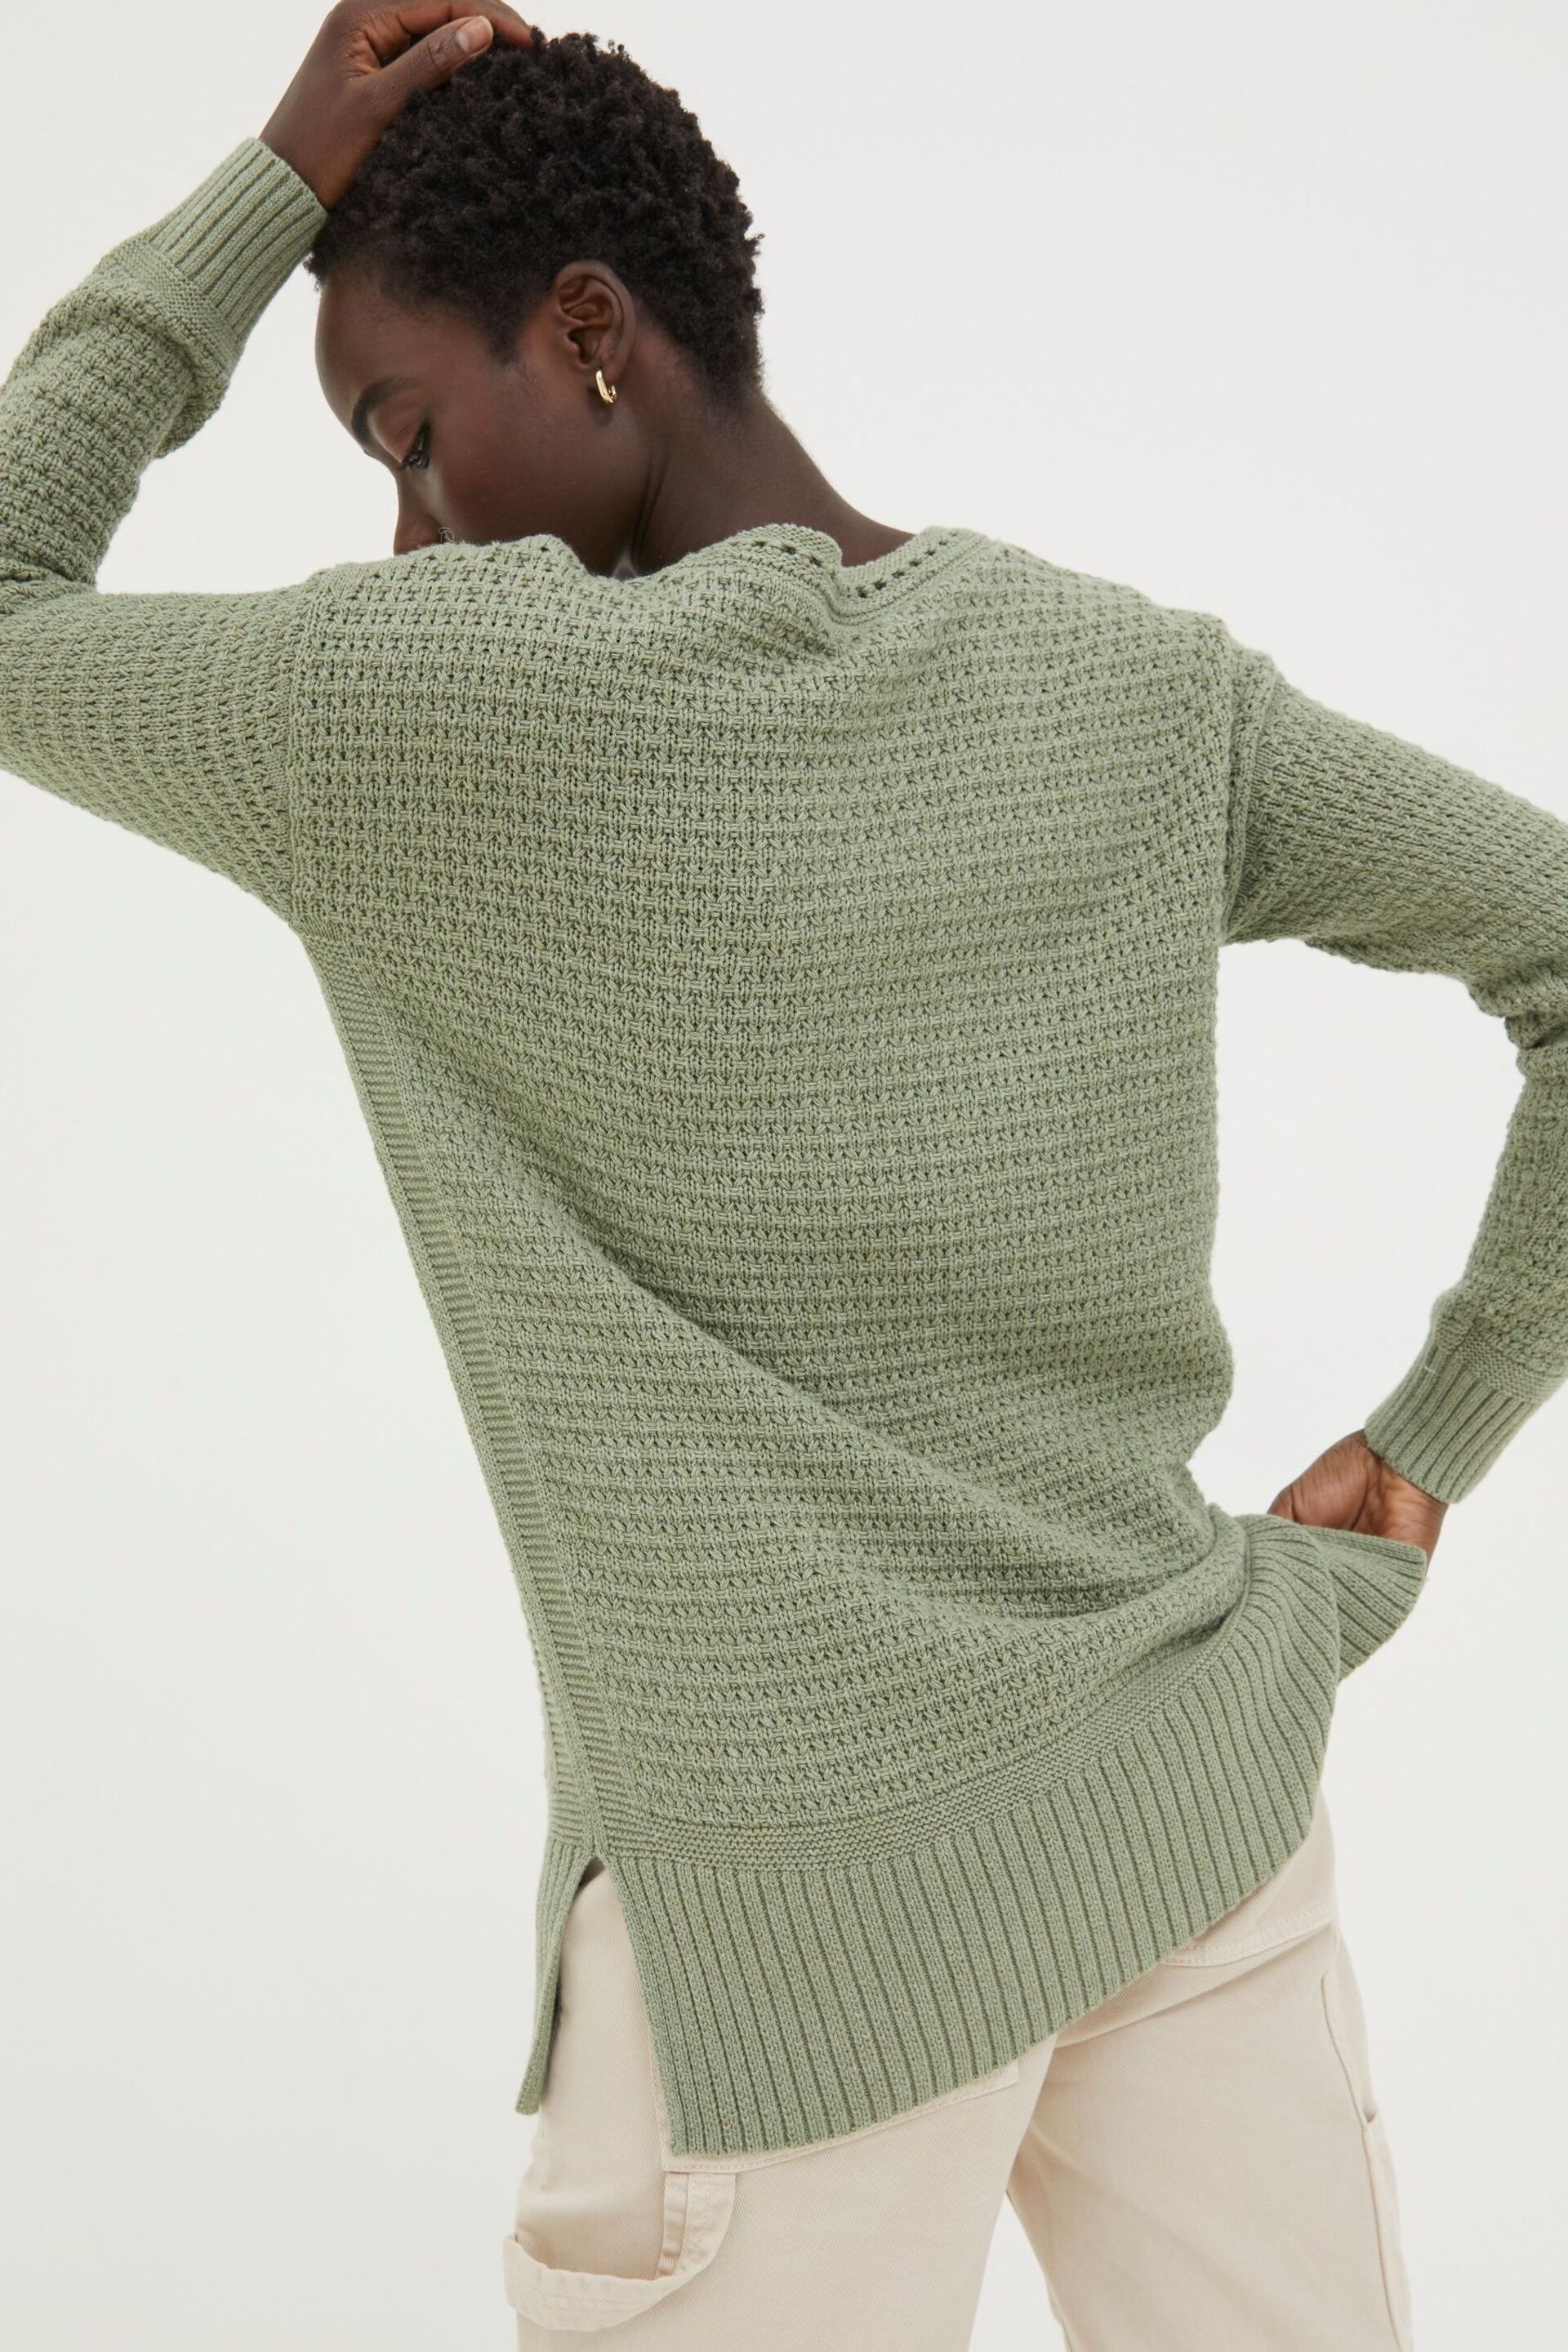 FatFace Green Tunic Jumper - Image 2 of 4